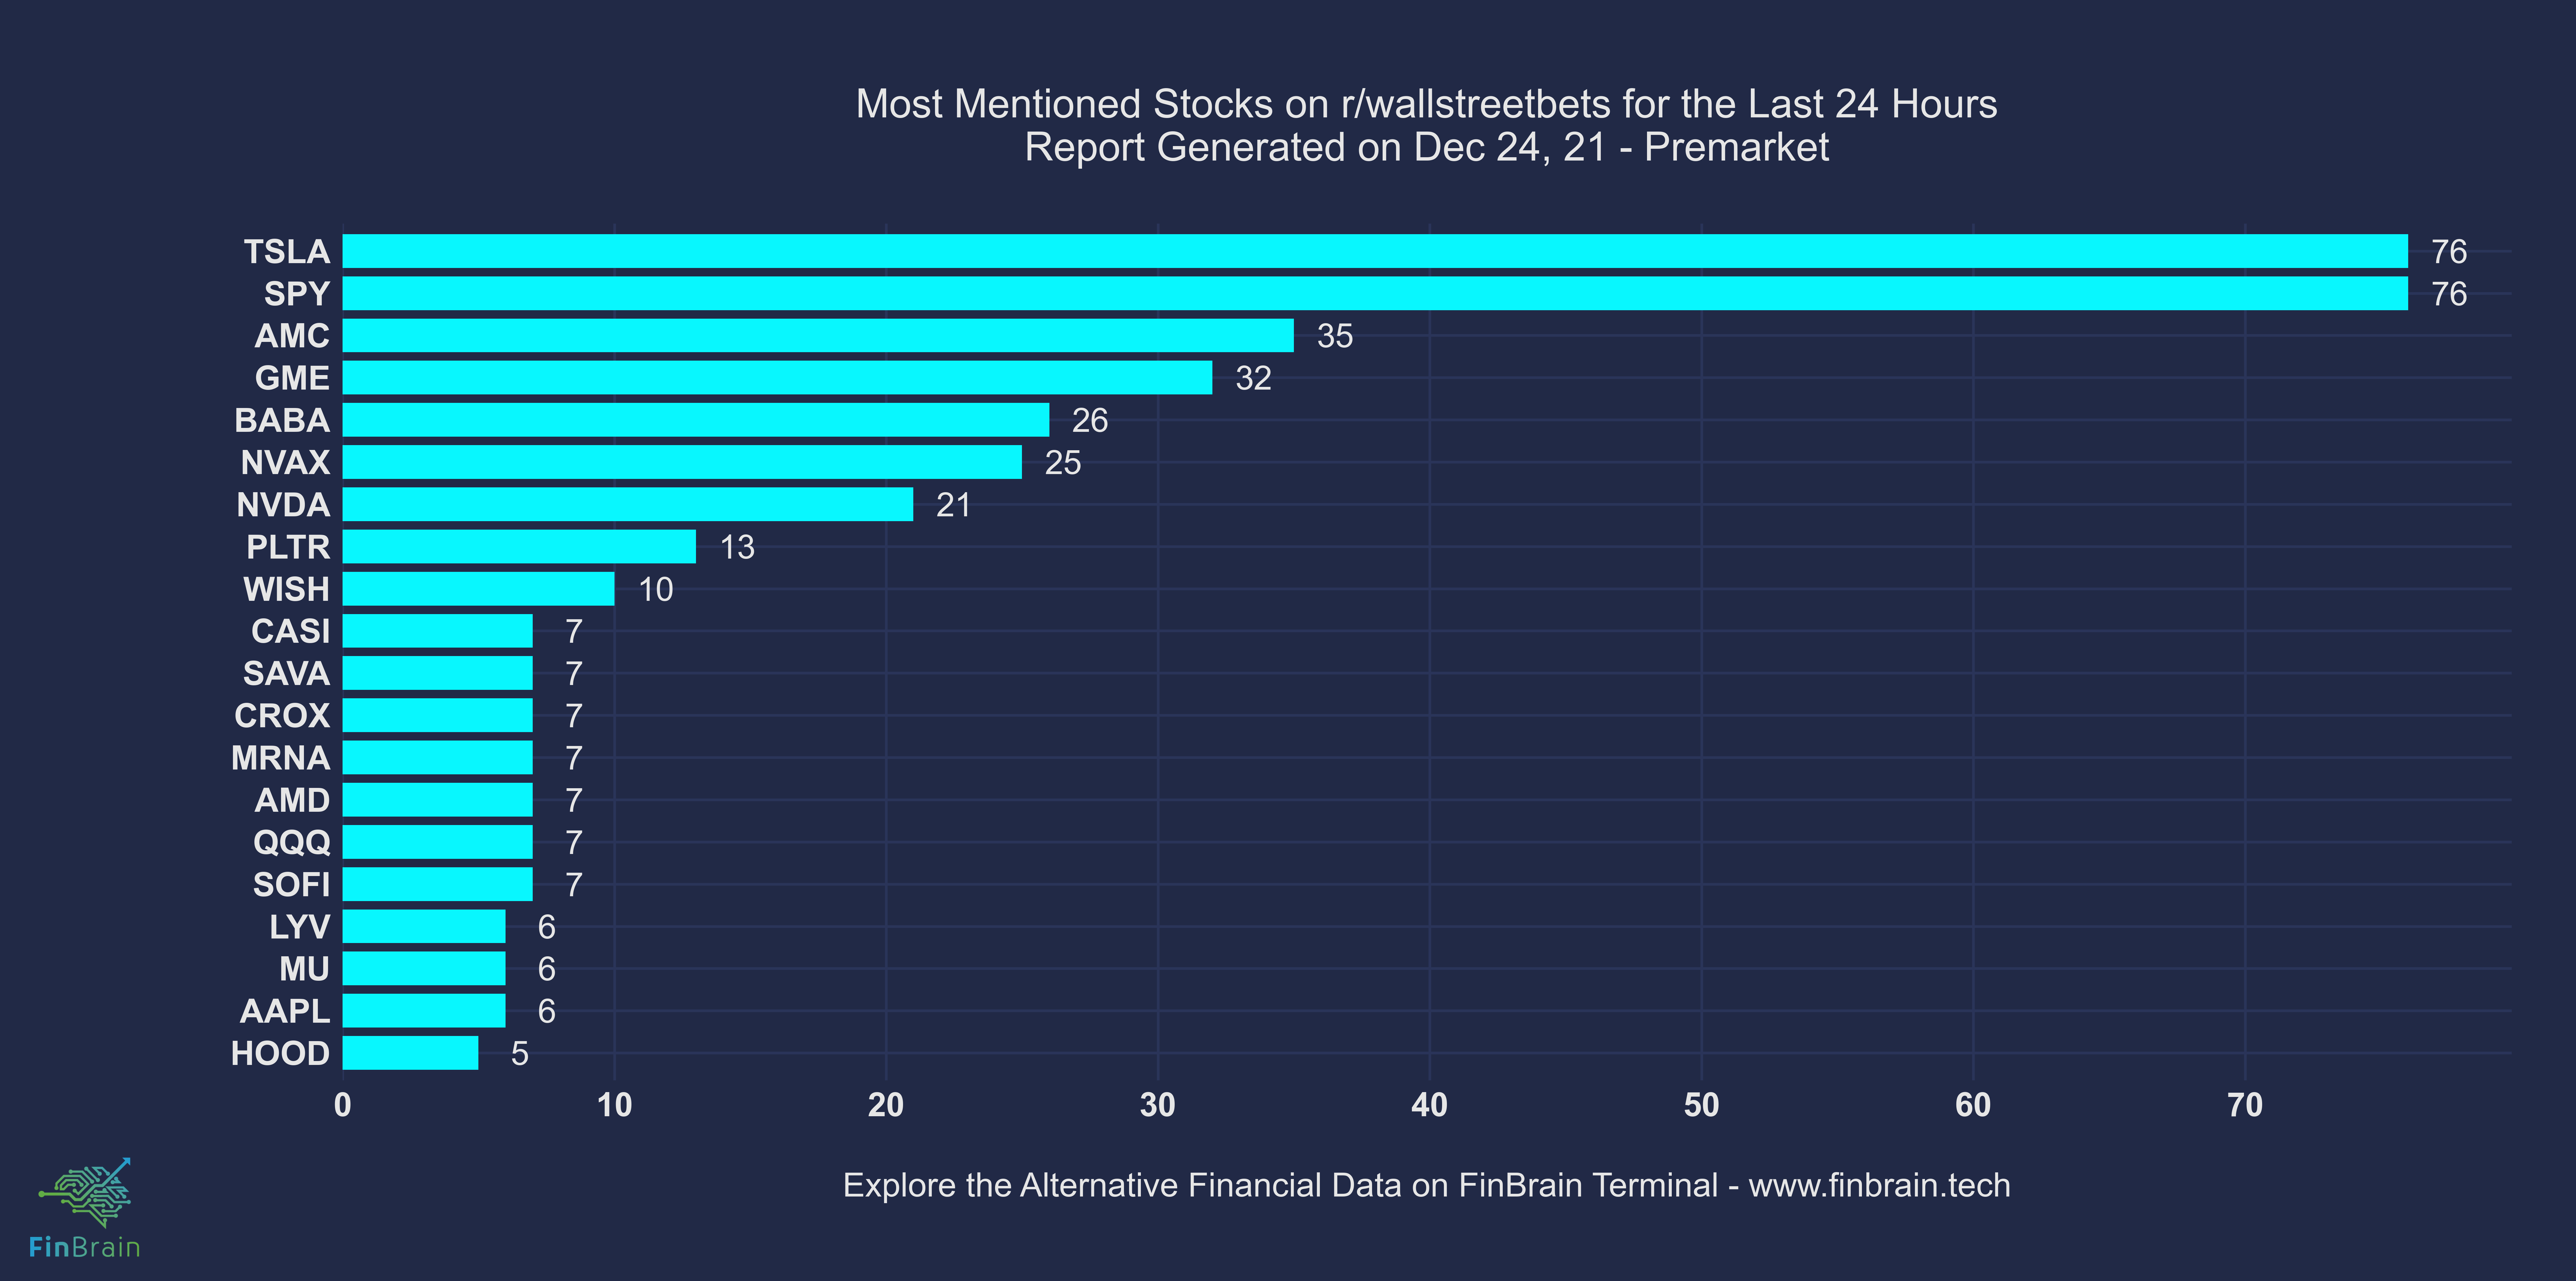 Most Discussed Stocks on WallStreetBets – Dec 24, 2021